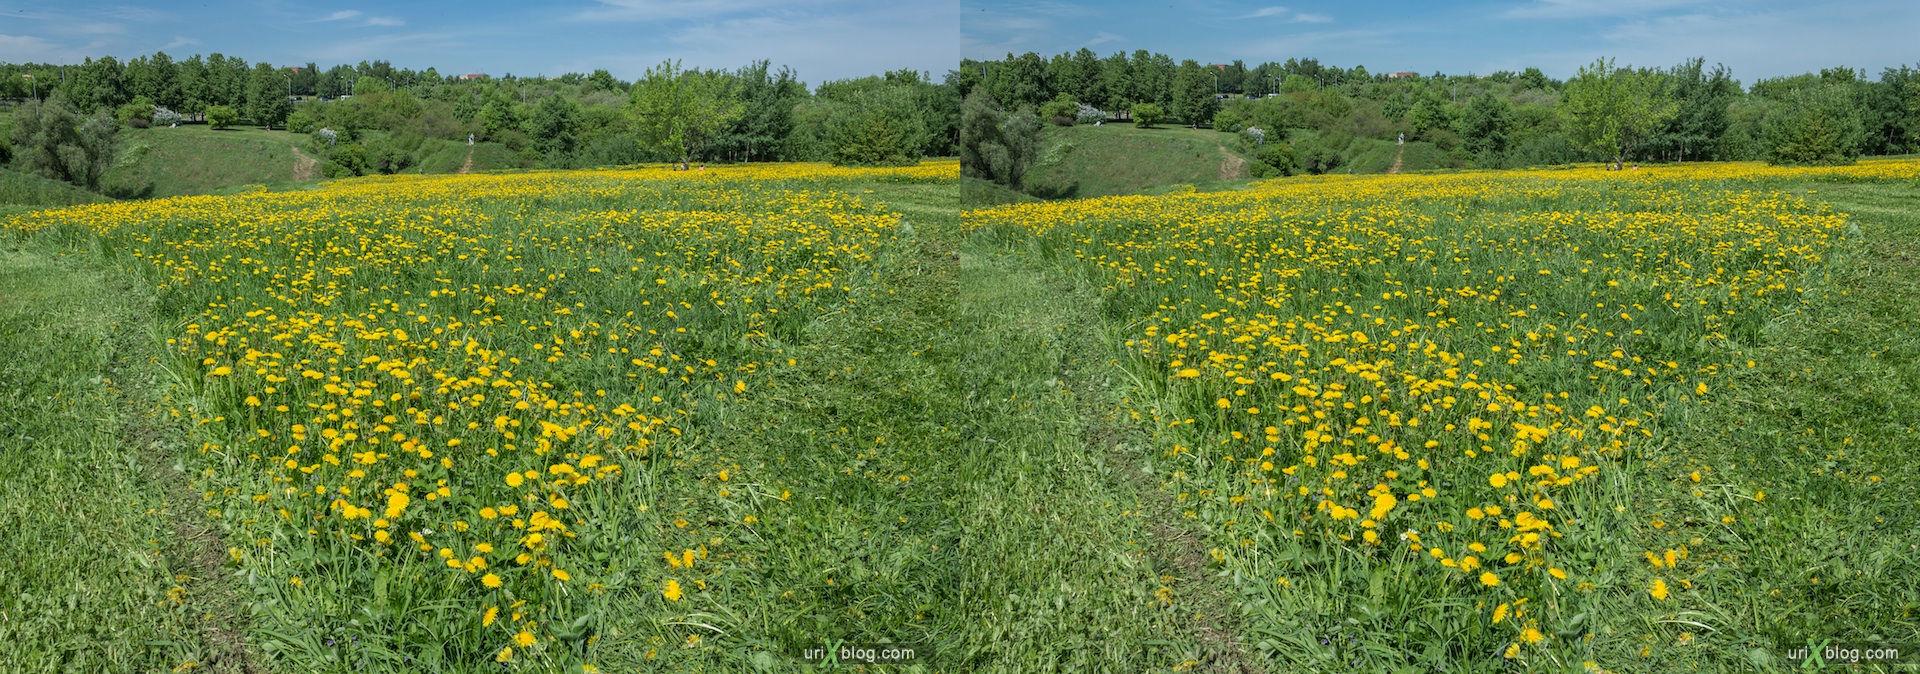 2013, dandelion, flower, grass, park, field, Moscow, Russia, spring, 3D, stereo pair, cross-eyed, crossview, cross view stereo pair, stereoscopic